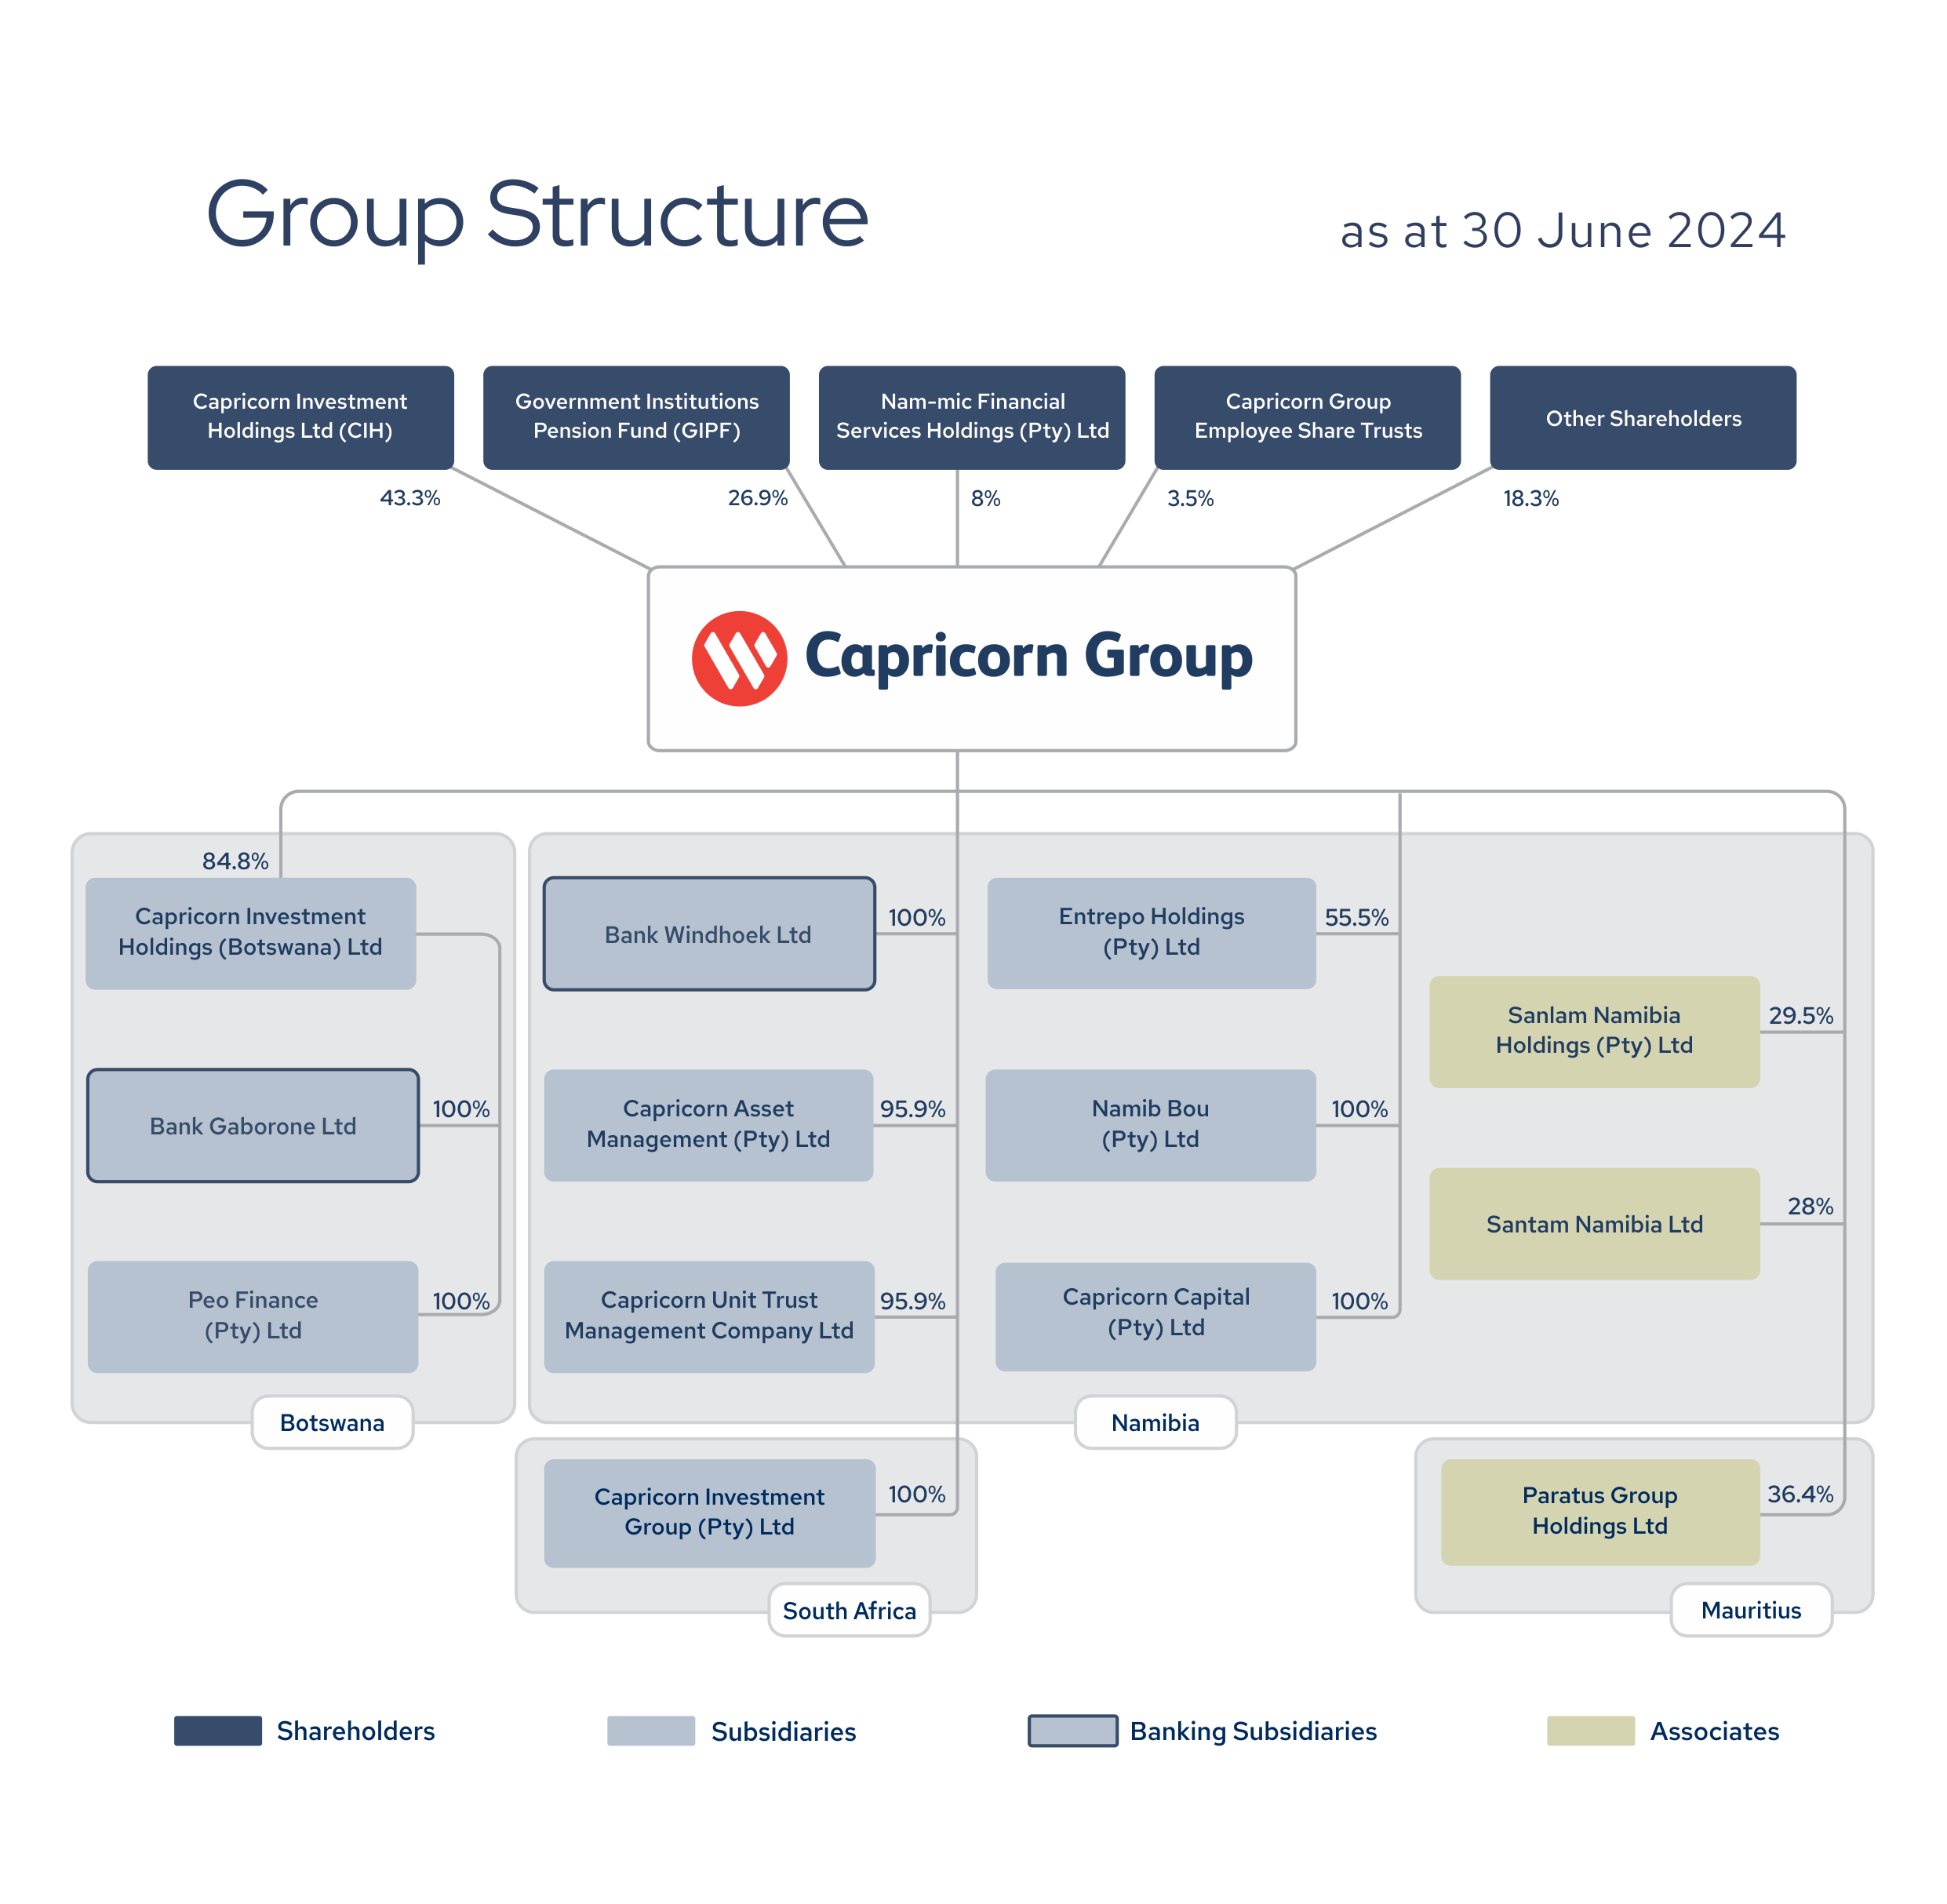 Group structure as at 31 March 2024